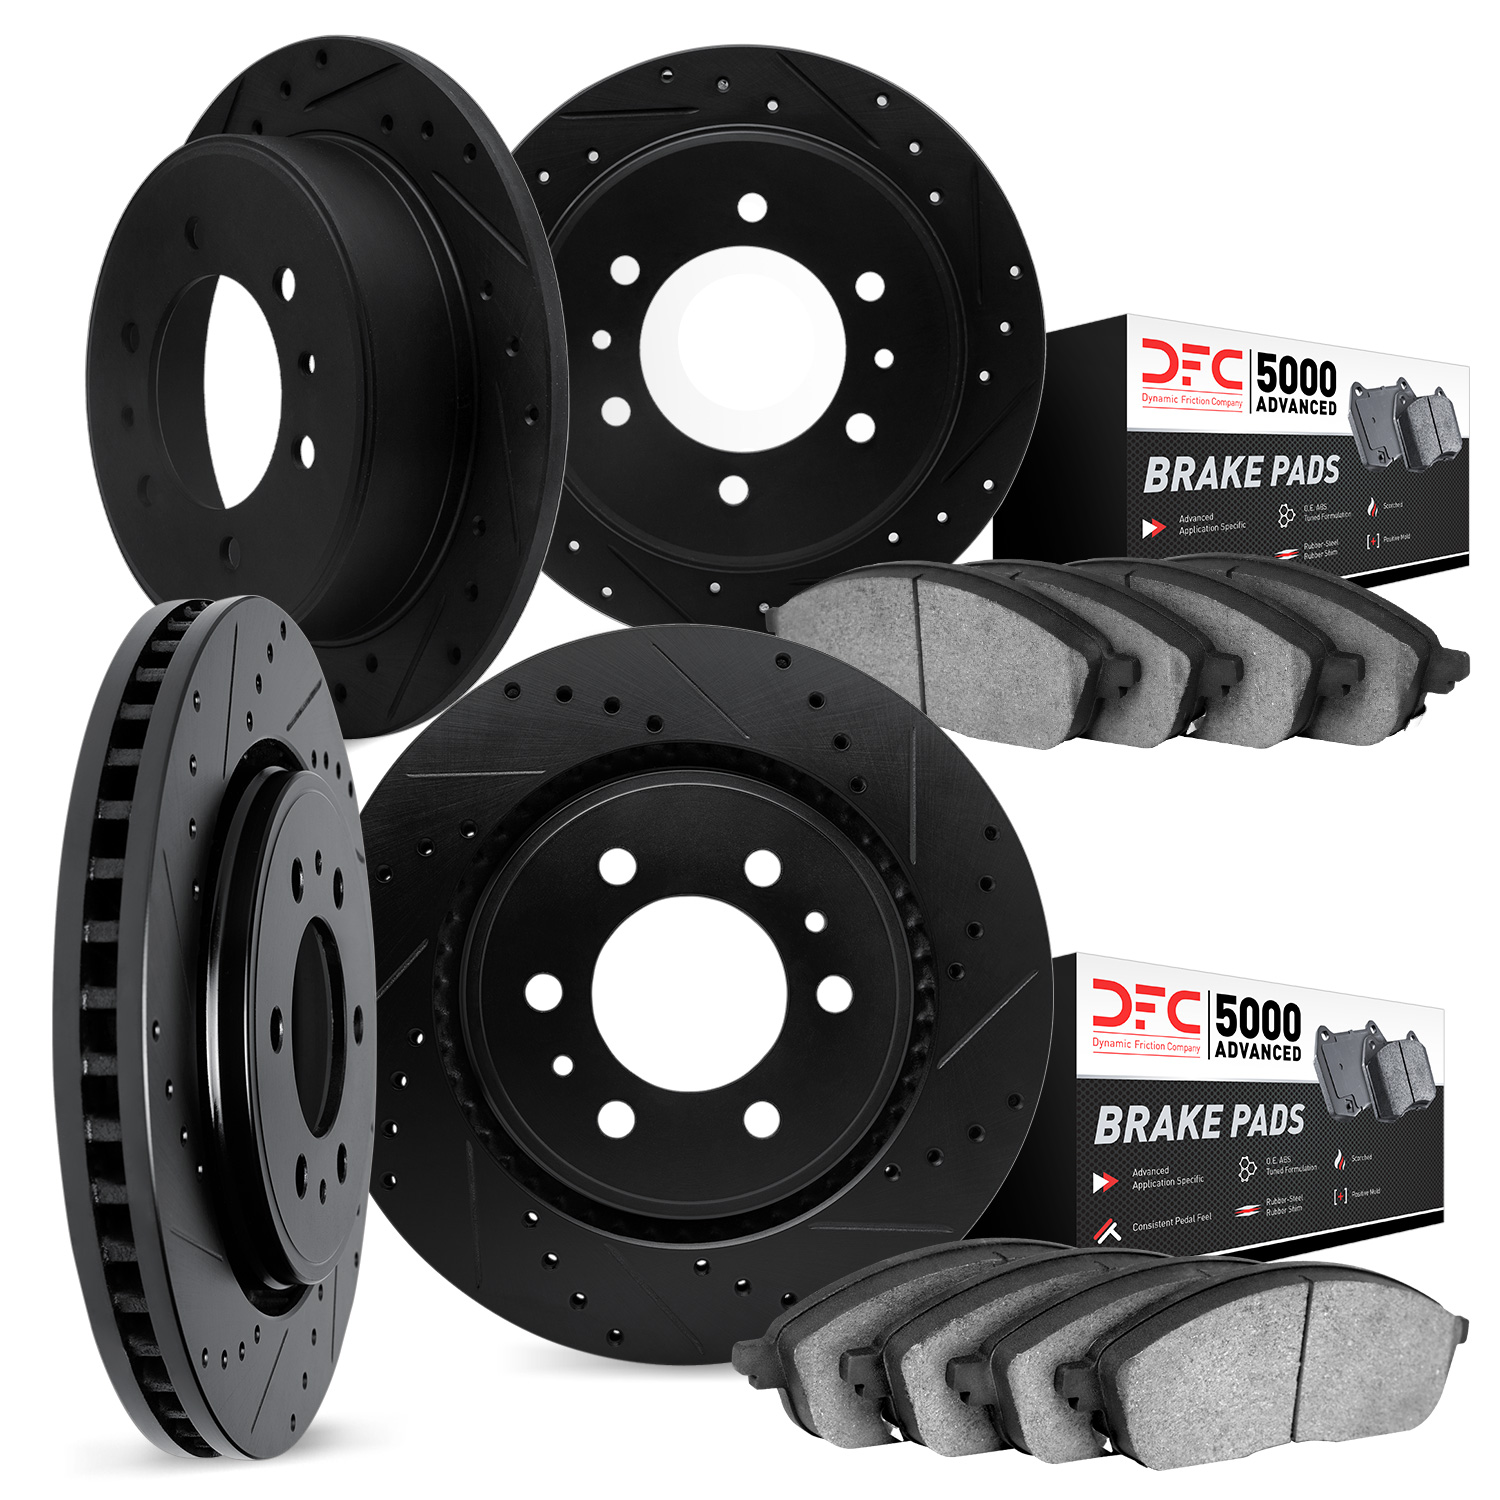 7504-37006 Drilled/Slotted Brake Rotors w/5000 Advanced Brake Pads Kit [Silver], 1988-1995 GM, Position: Front and Rear